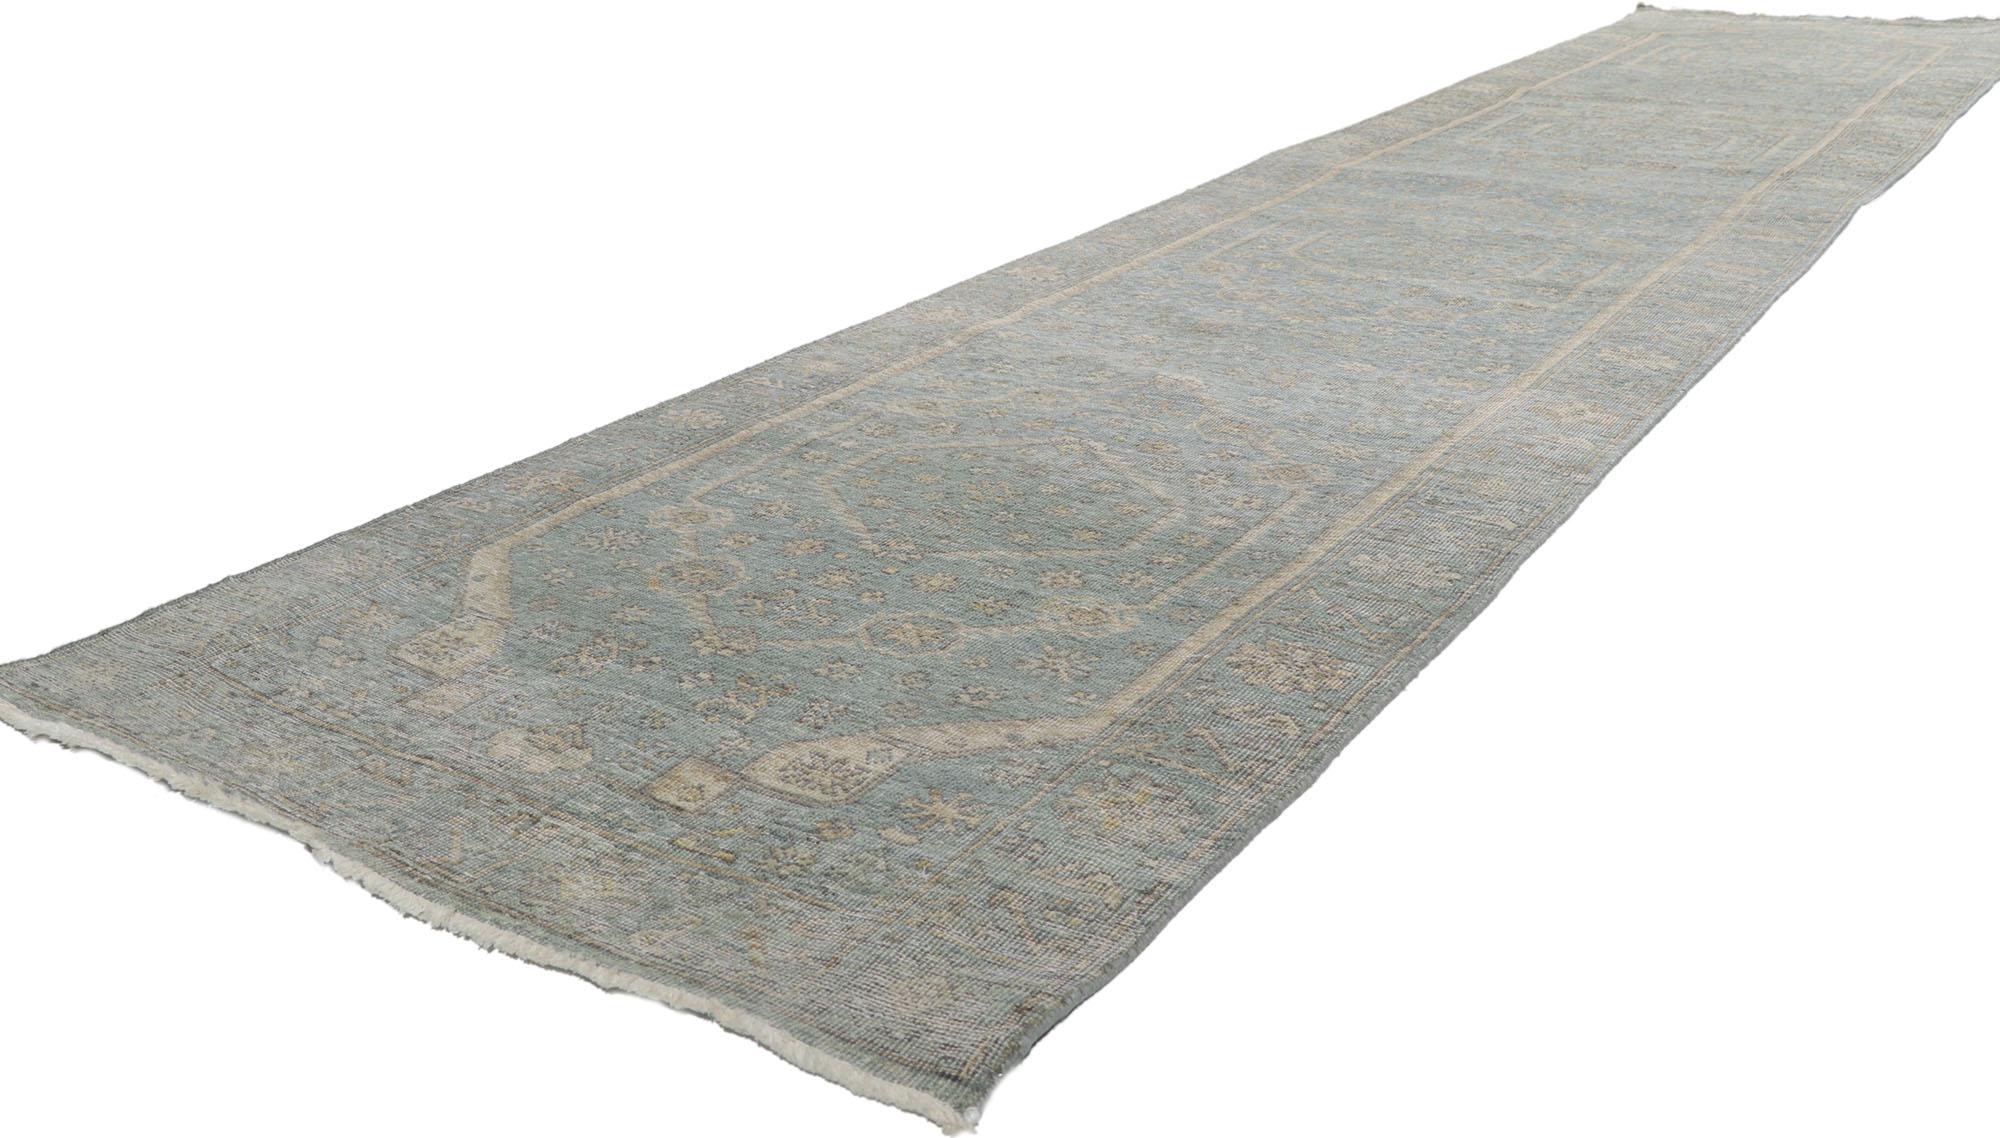 30723 Vintage-Inspired Modern Oushak Rug, 02'11 x 13'11.
Emanating traditional sensibility and rugged beauty with a neutral color palette, this hand-knotted wool distressed Indian Oushak runner creates an inimitable warmth and calming ambiance. The